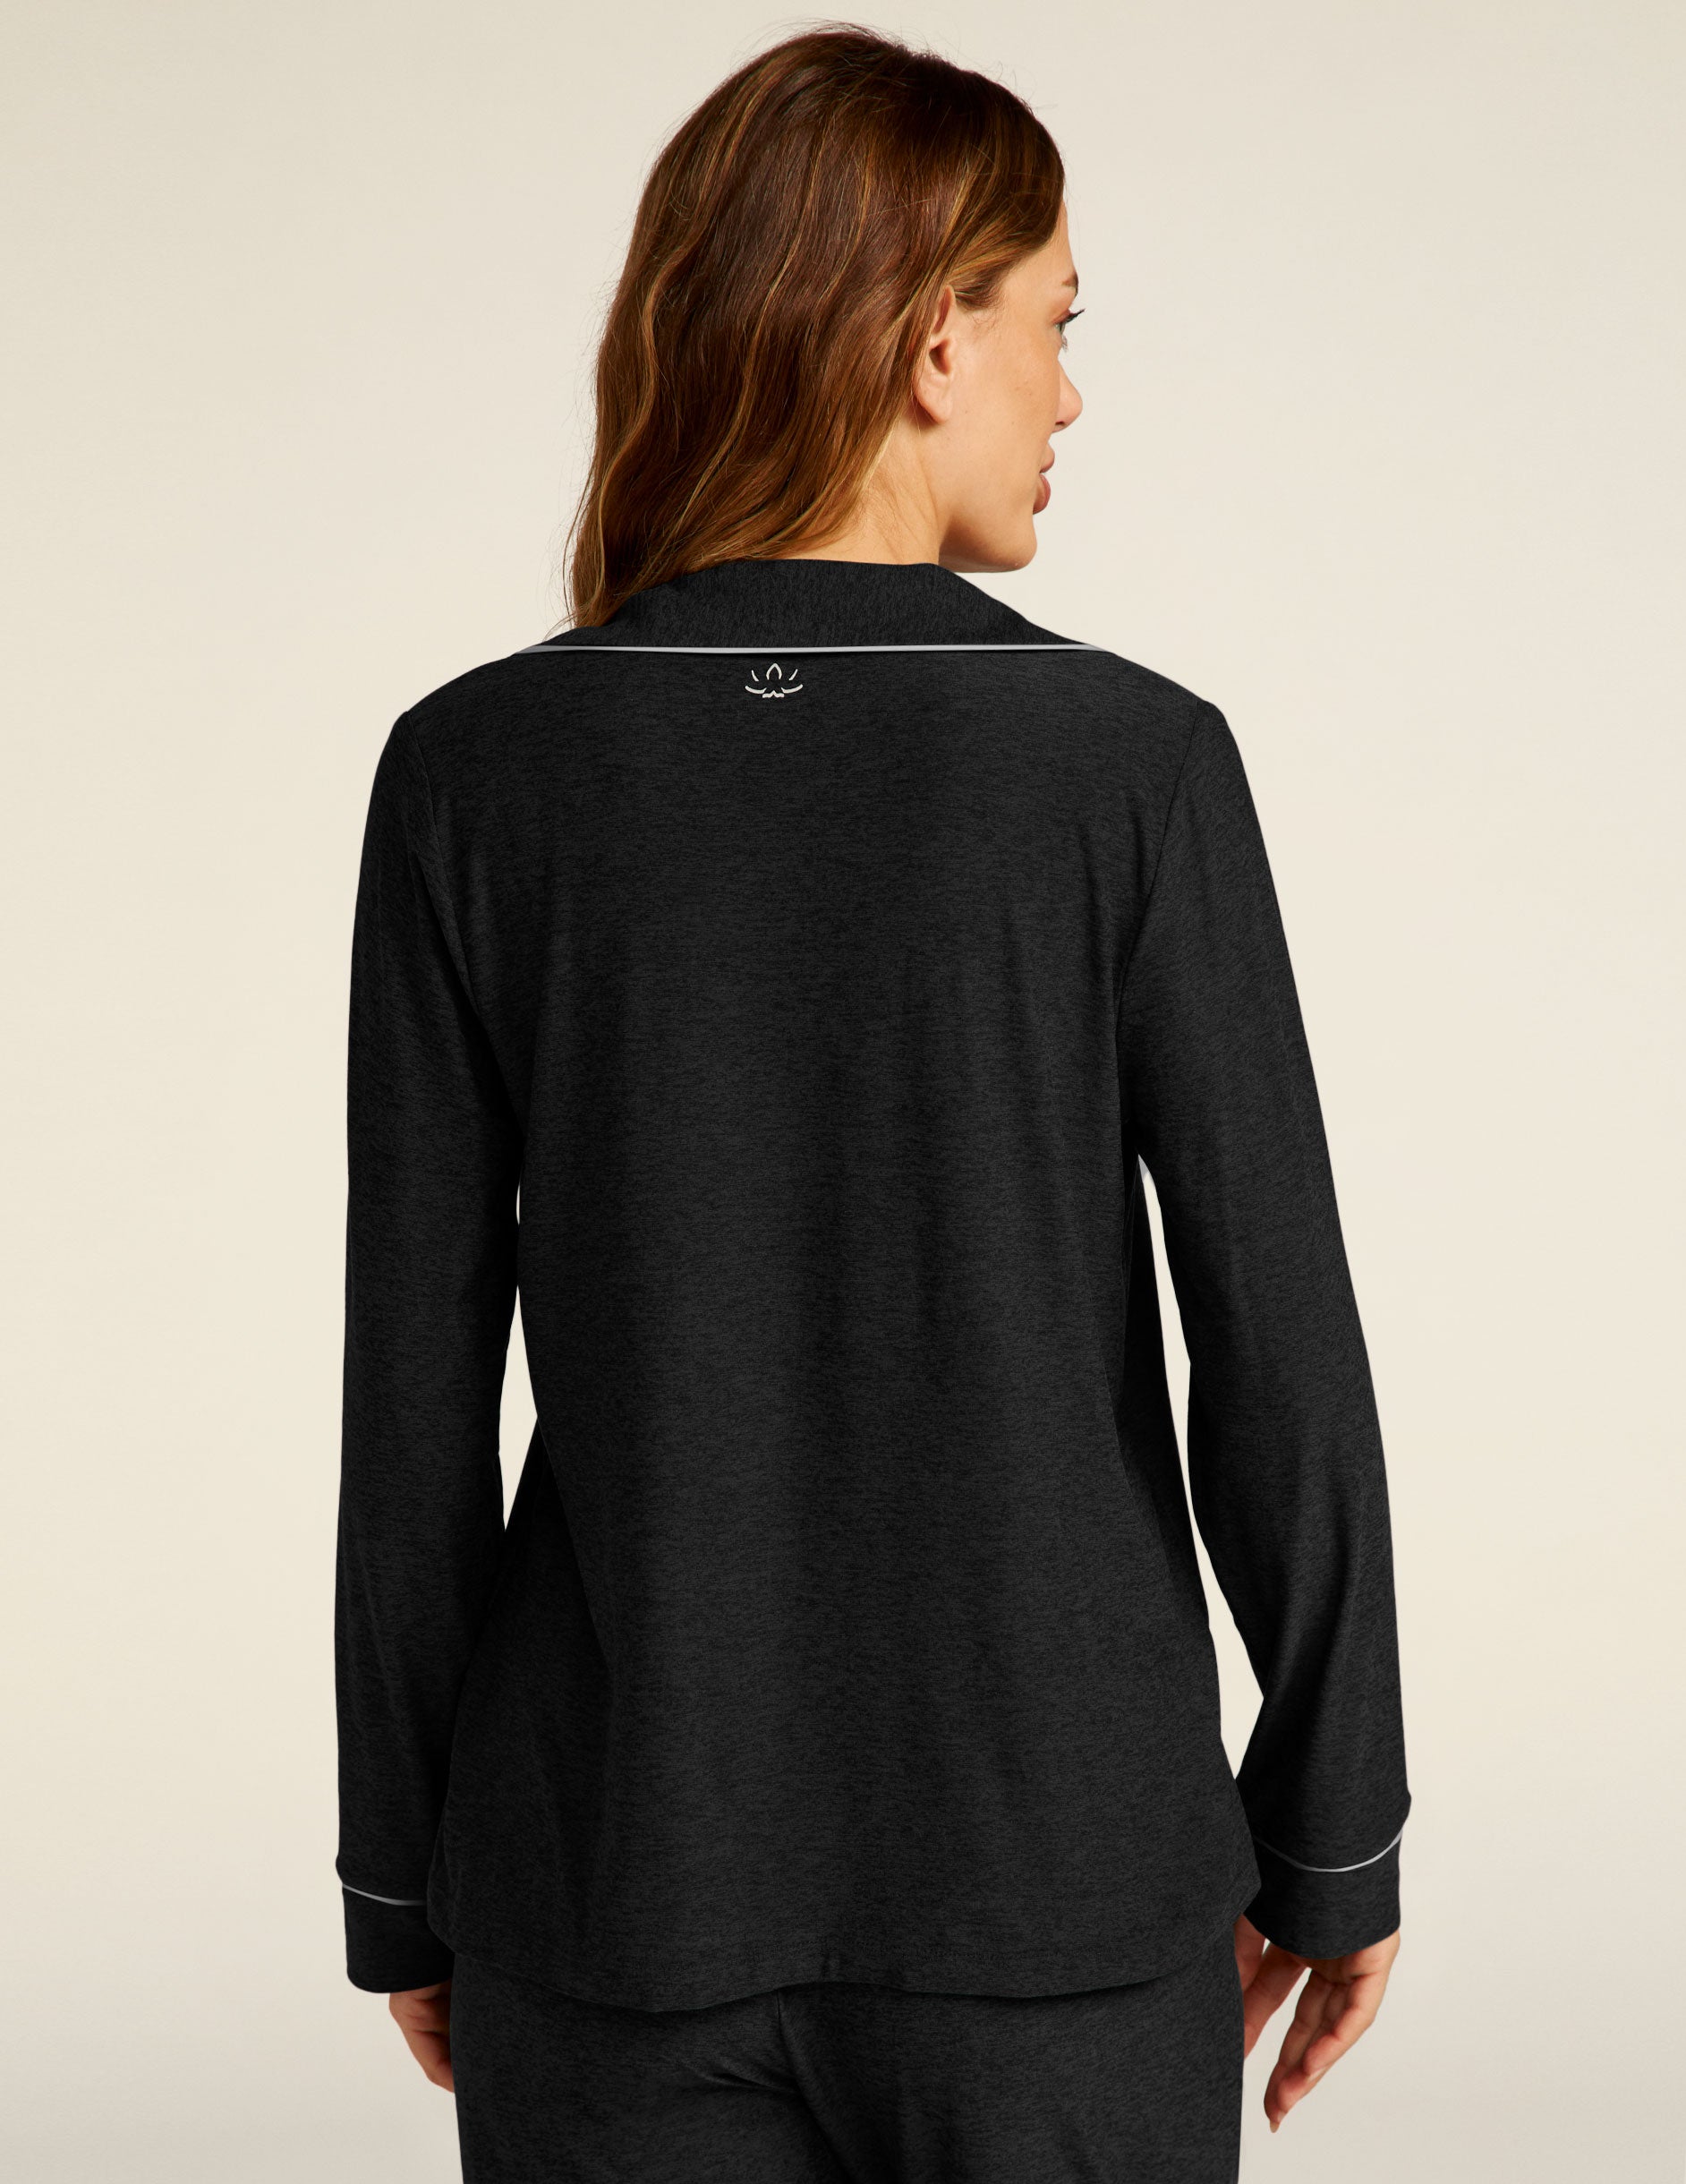 black long sleeve sleep top with white piping. 